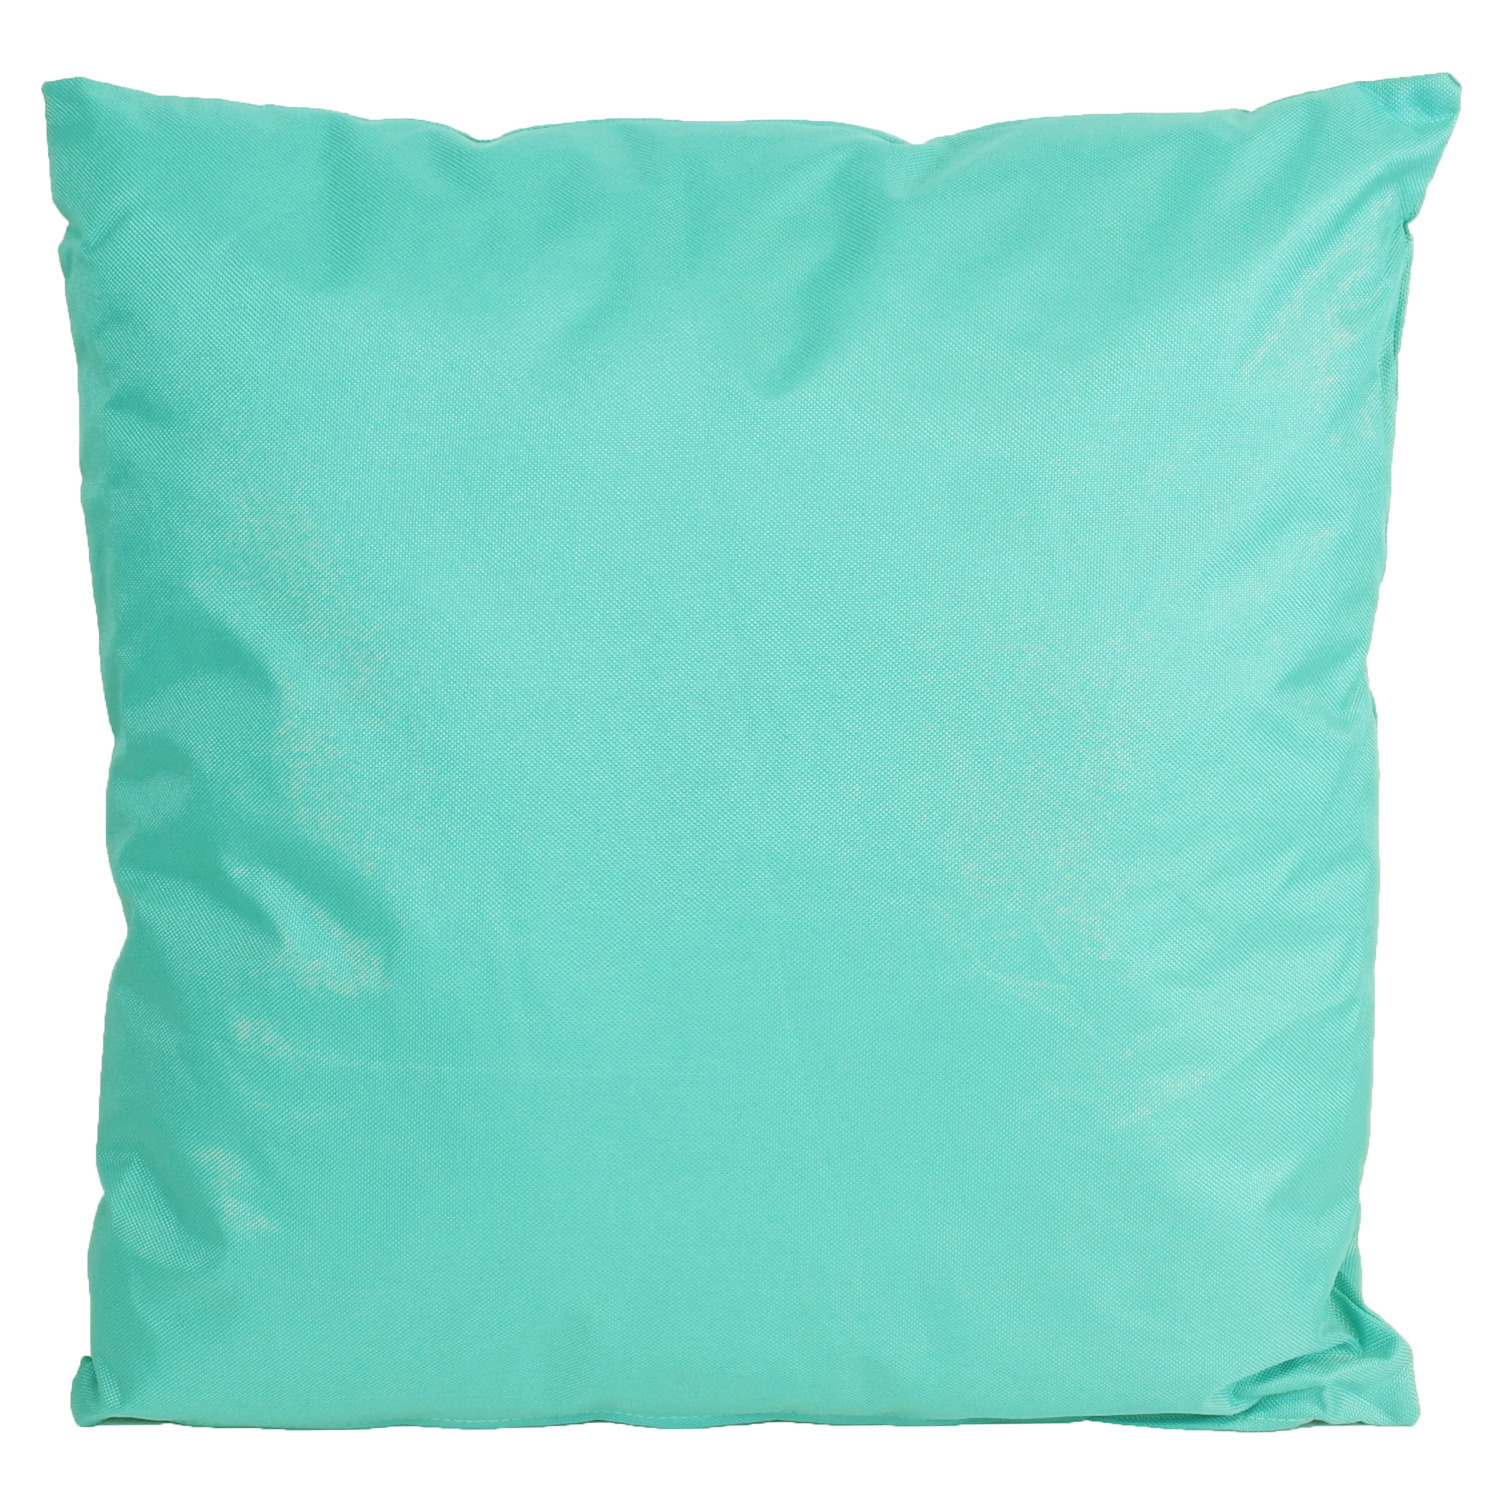 Anna's collection buitenkussens turquoise blauw 60 x 60 cm